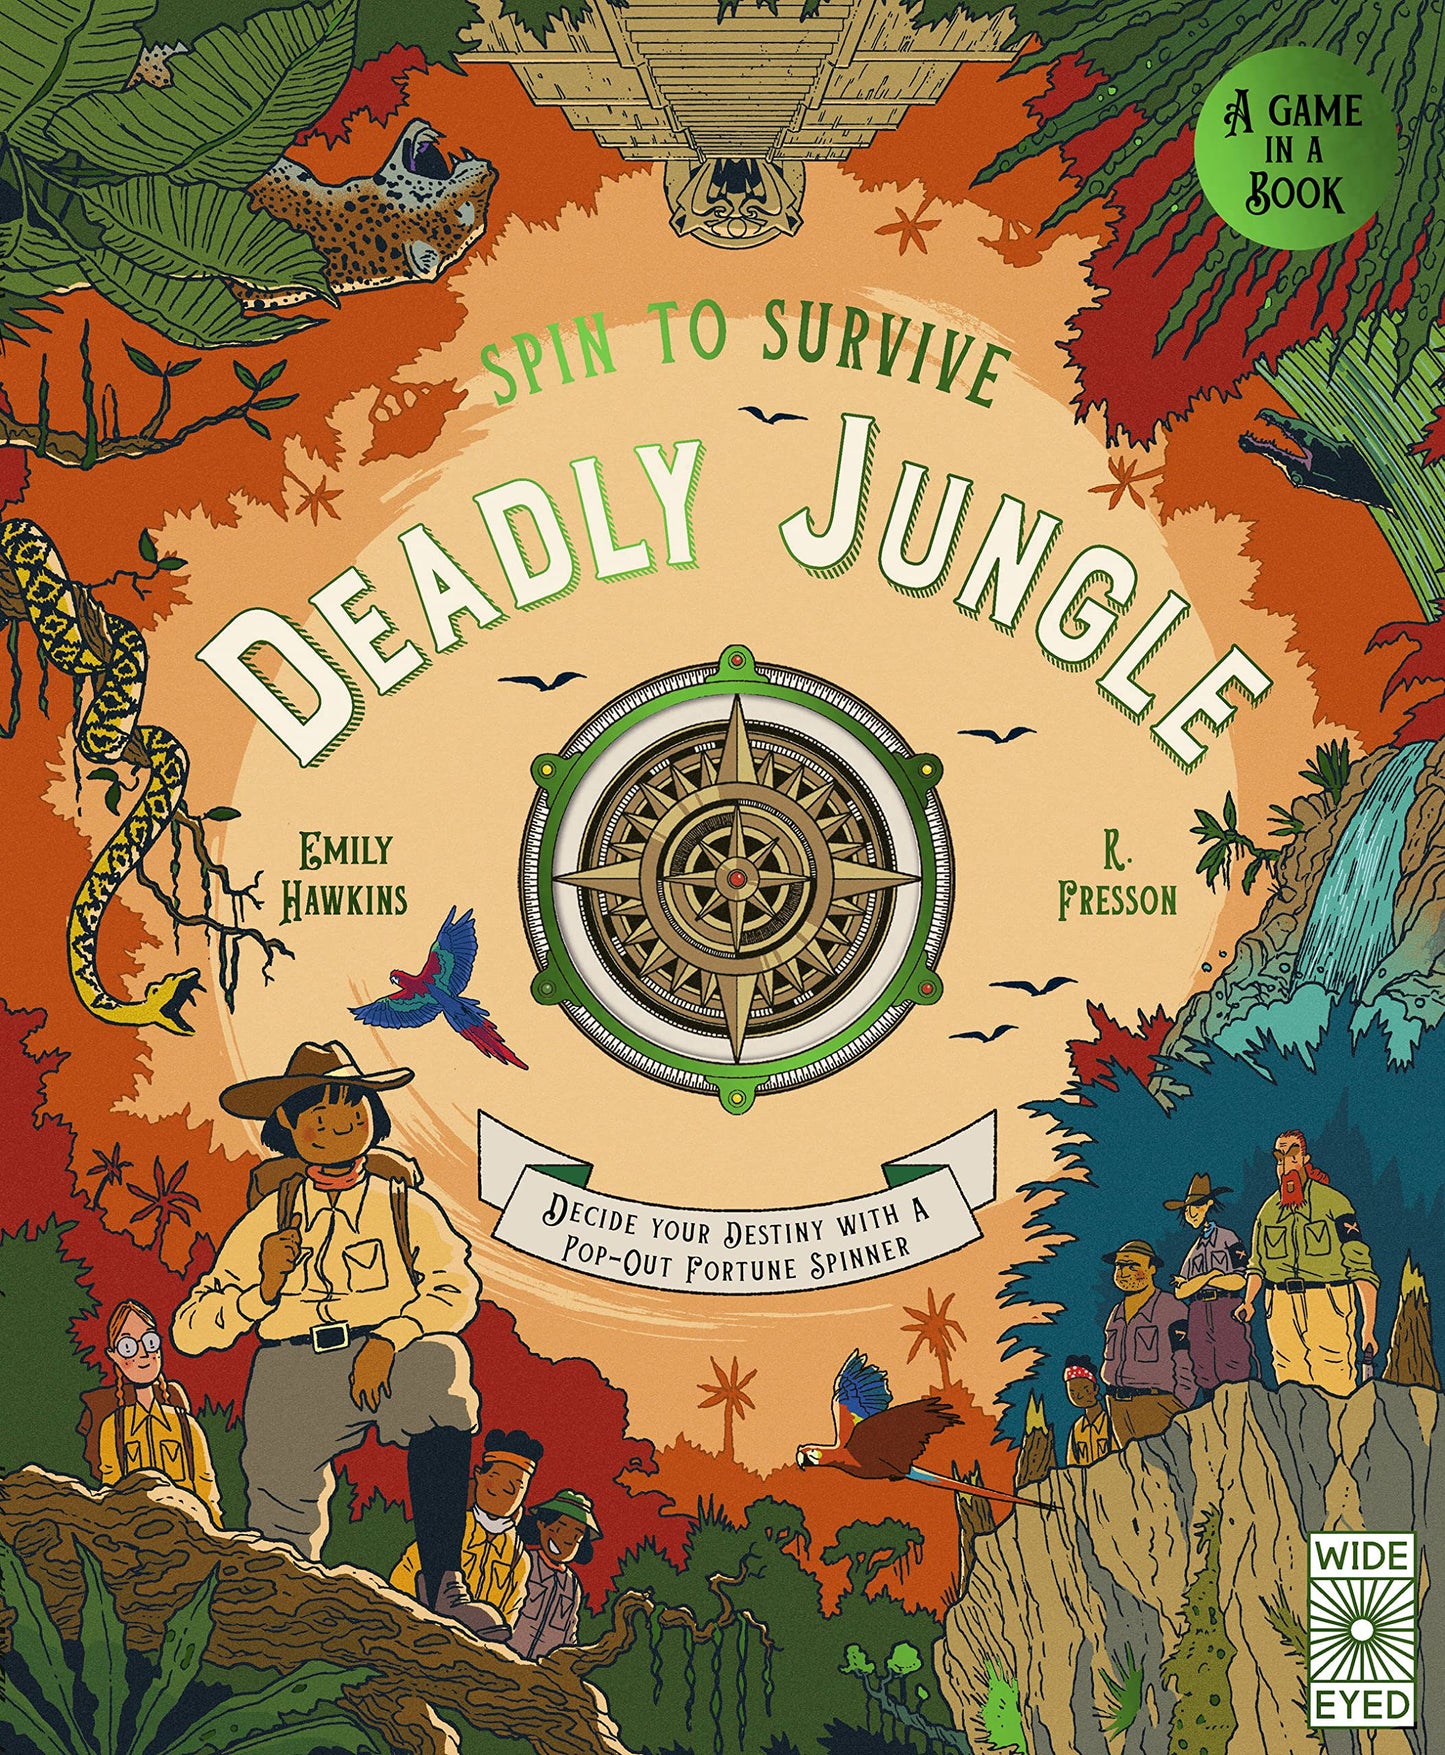 Spin To Survive Deadly Jungle - Decide Your Destiny with a Pop-Up Fortune Spinner